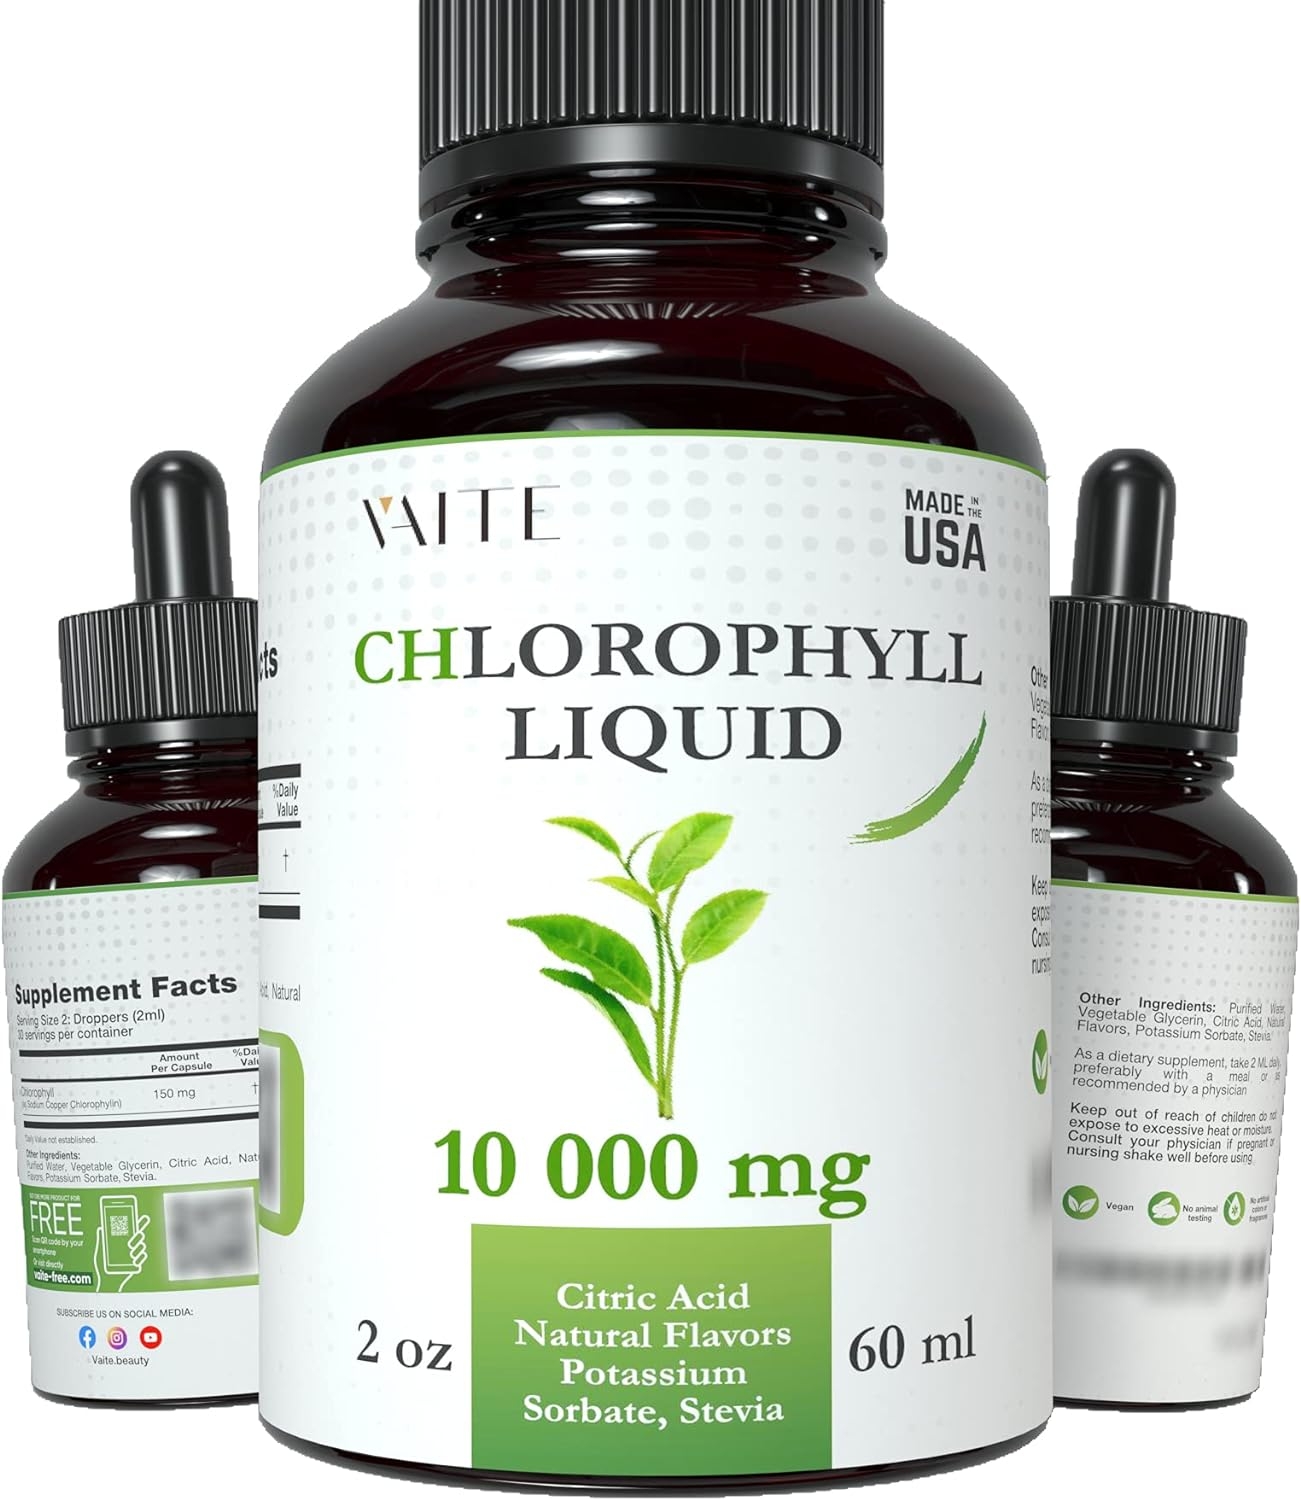 Liquid Chlorophyll Drops for Water Mint Flavored - Chlorophyll Supplement for Health - Energy & Immune System Booster - Free Sugar & Alcohol - Organic Sodium Copper Chlorophyllin Extract (2fl.oz)